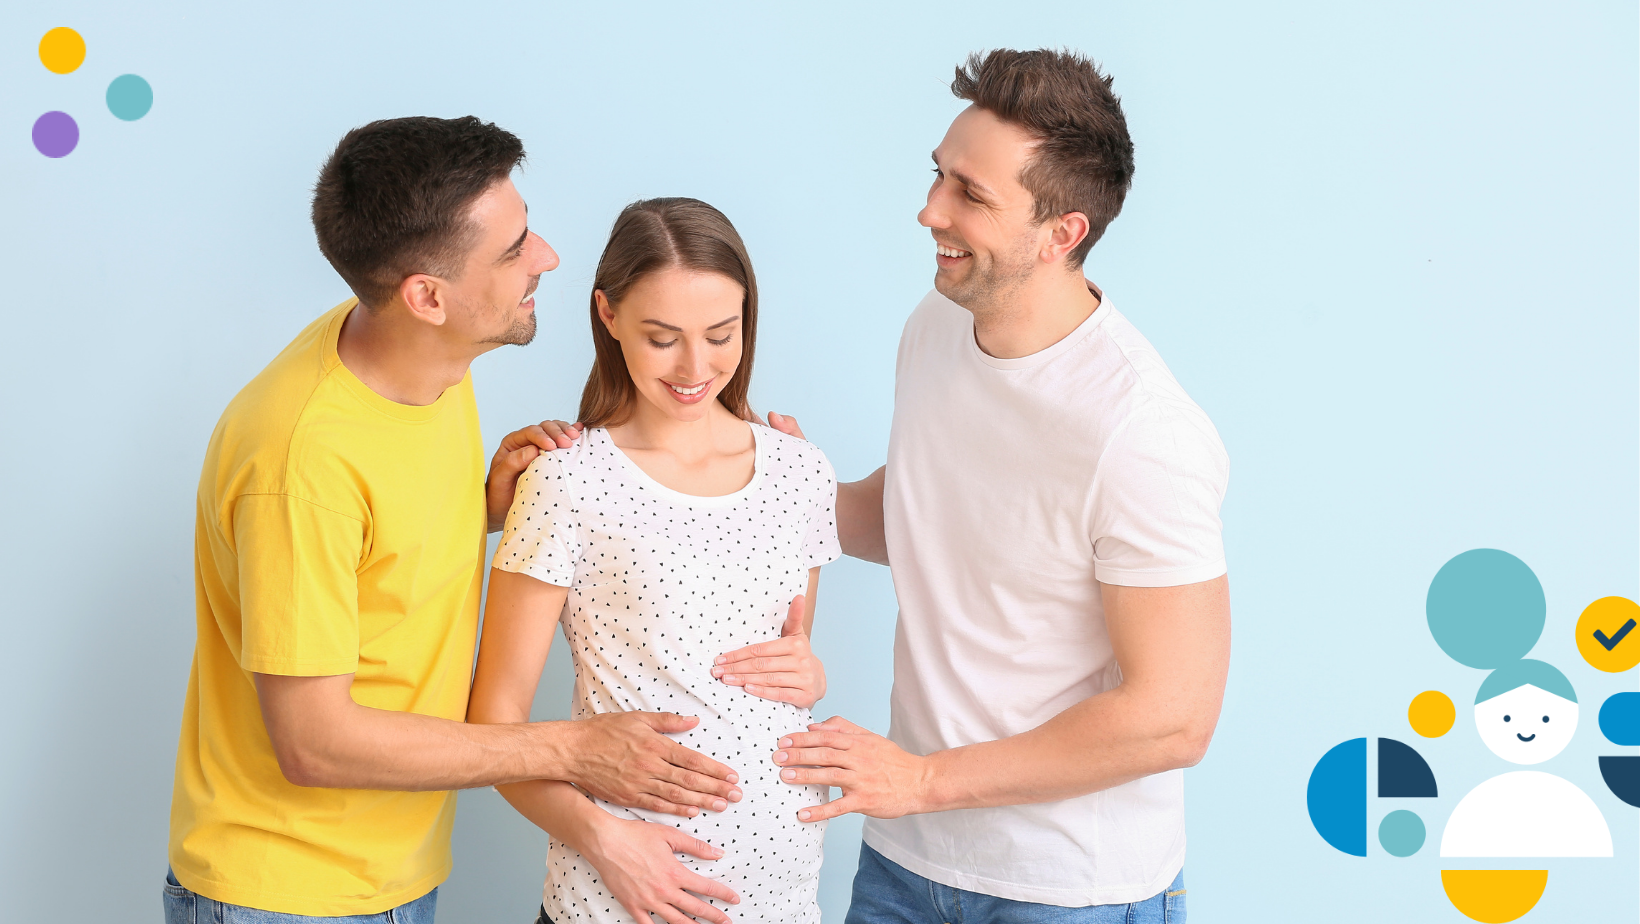 How to become a surrogate